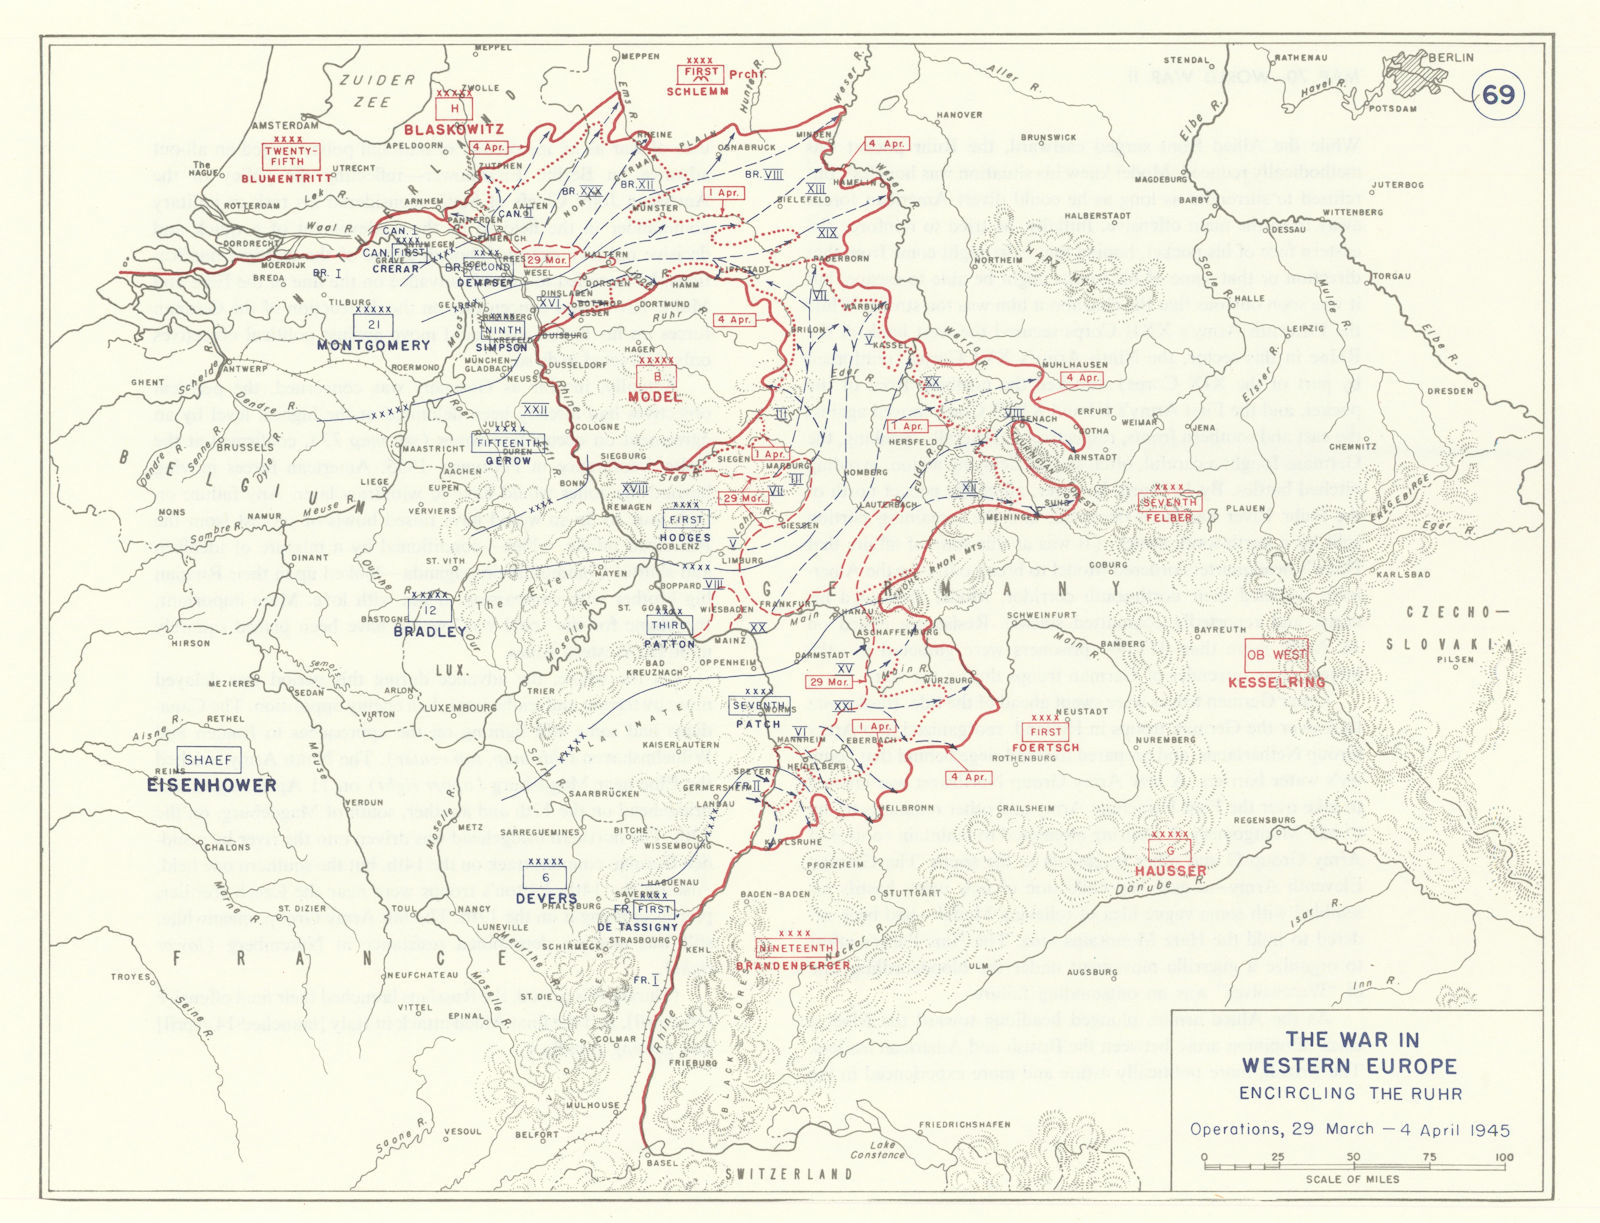 World War 2. Western Front. 29 March-4 April 1945. Encircling the Ruhr 1959 map